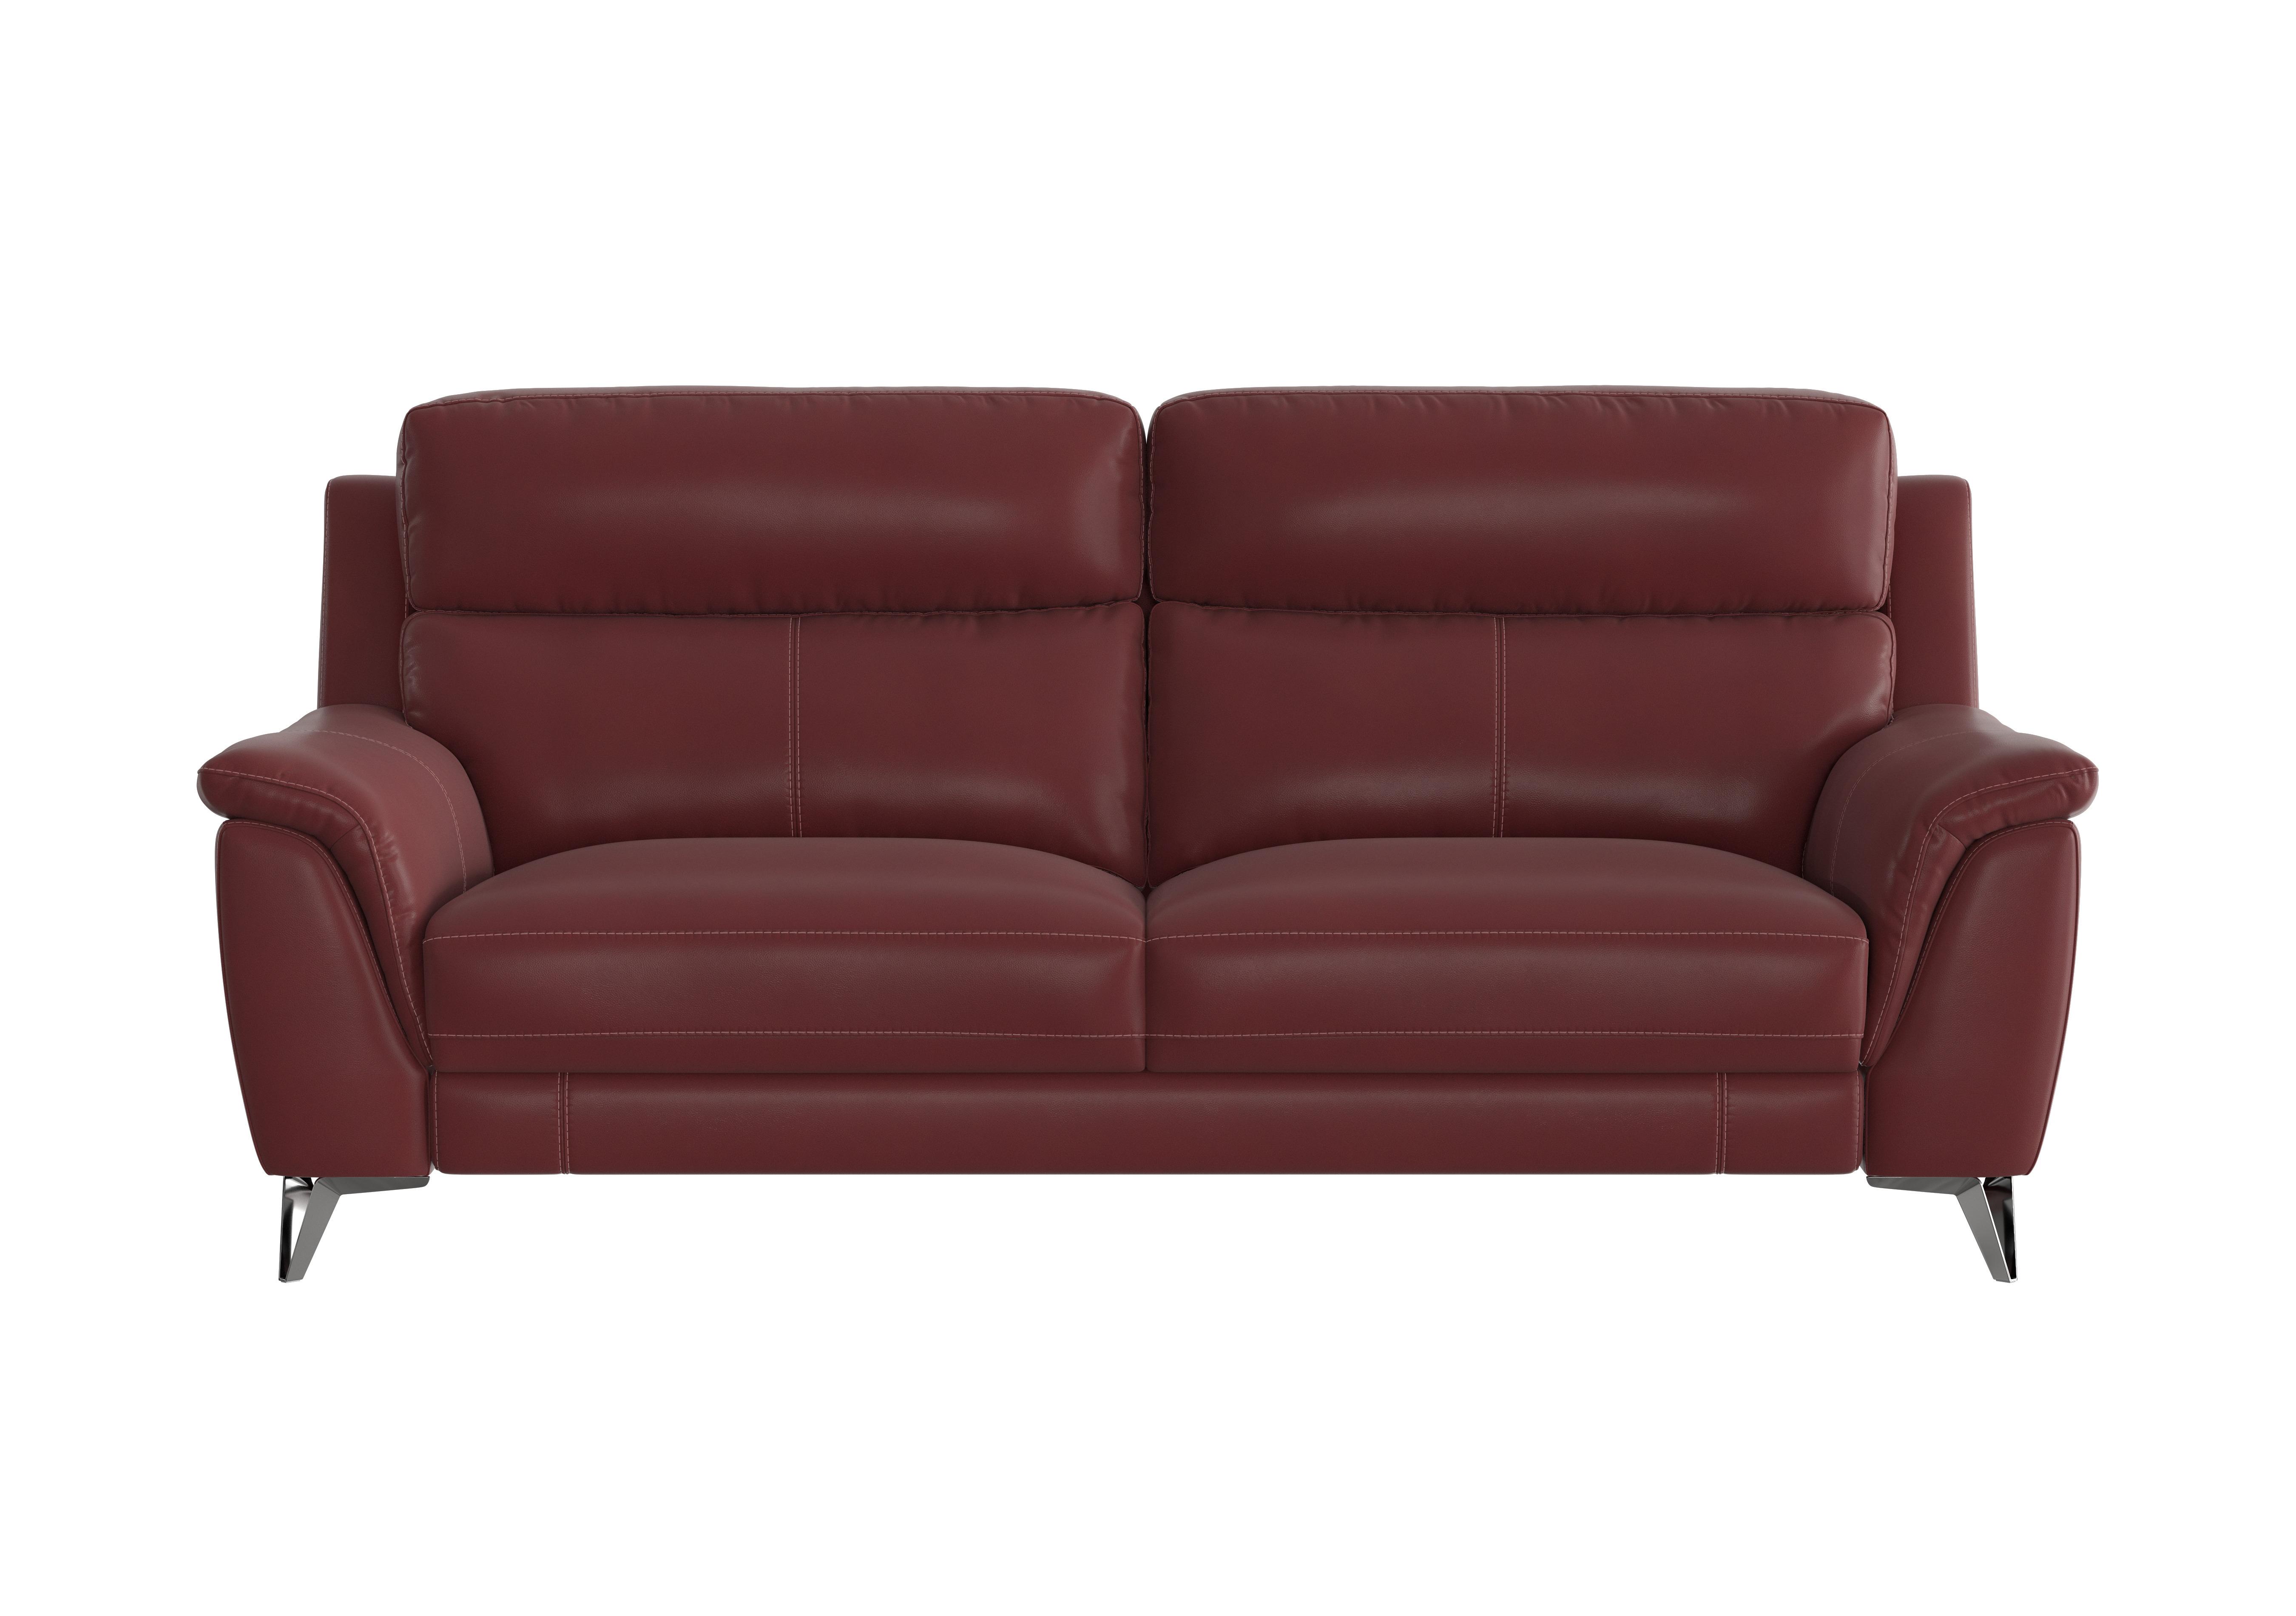 Contempo 3 Seater Leather Sofa in Bv-035c Deep Red on Furniture Village